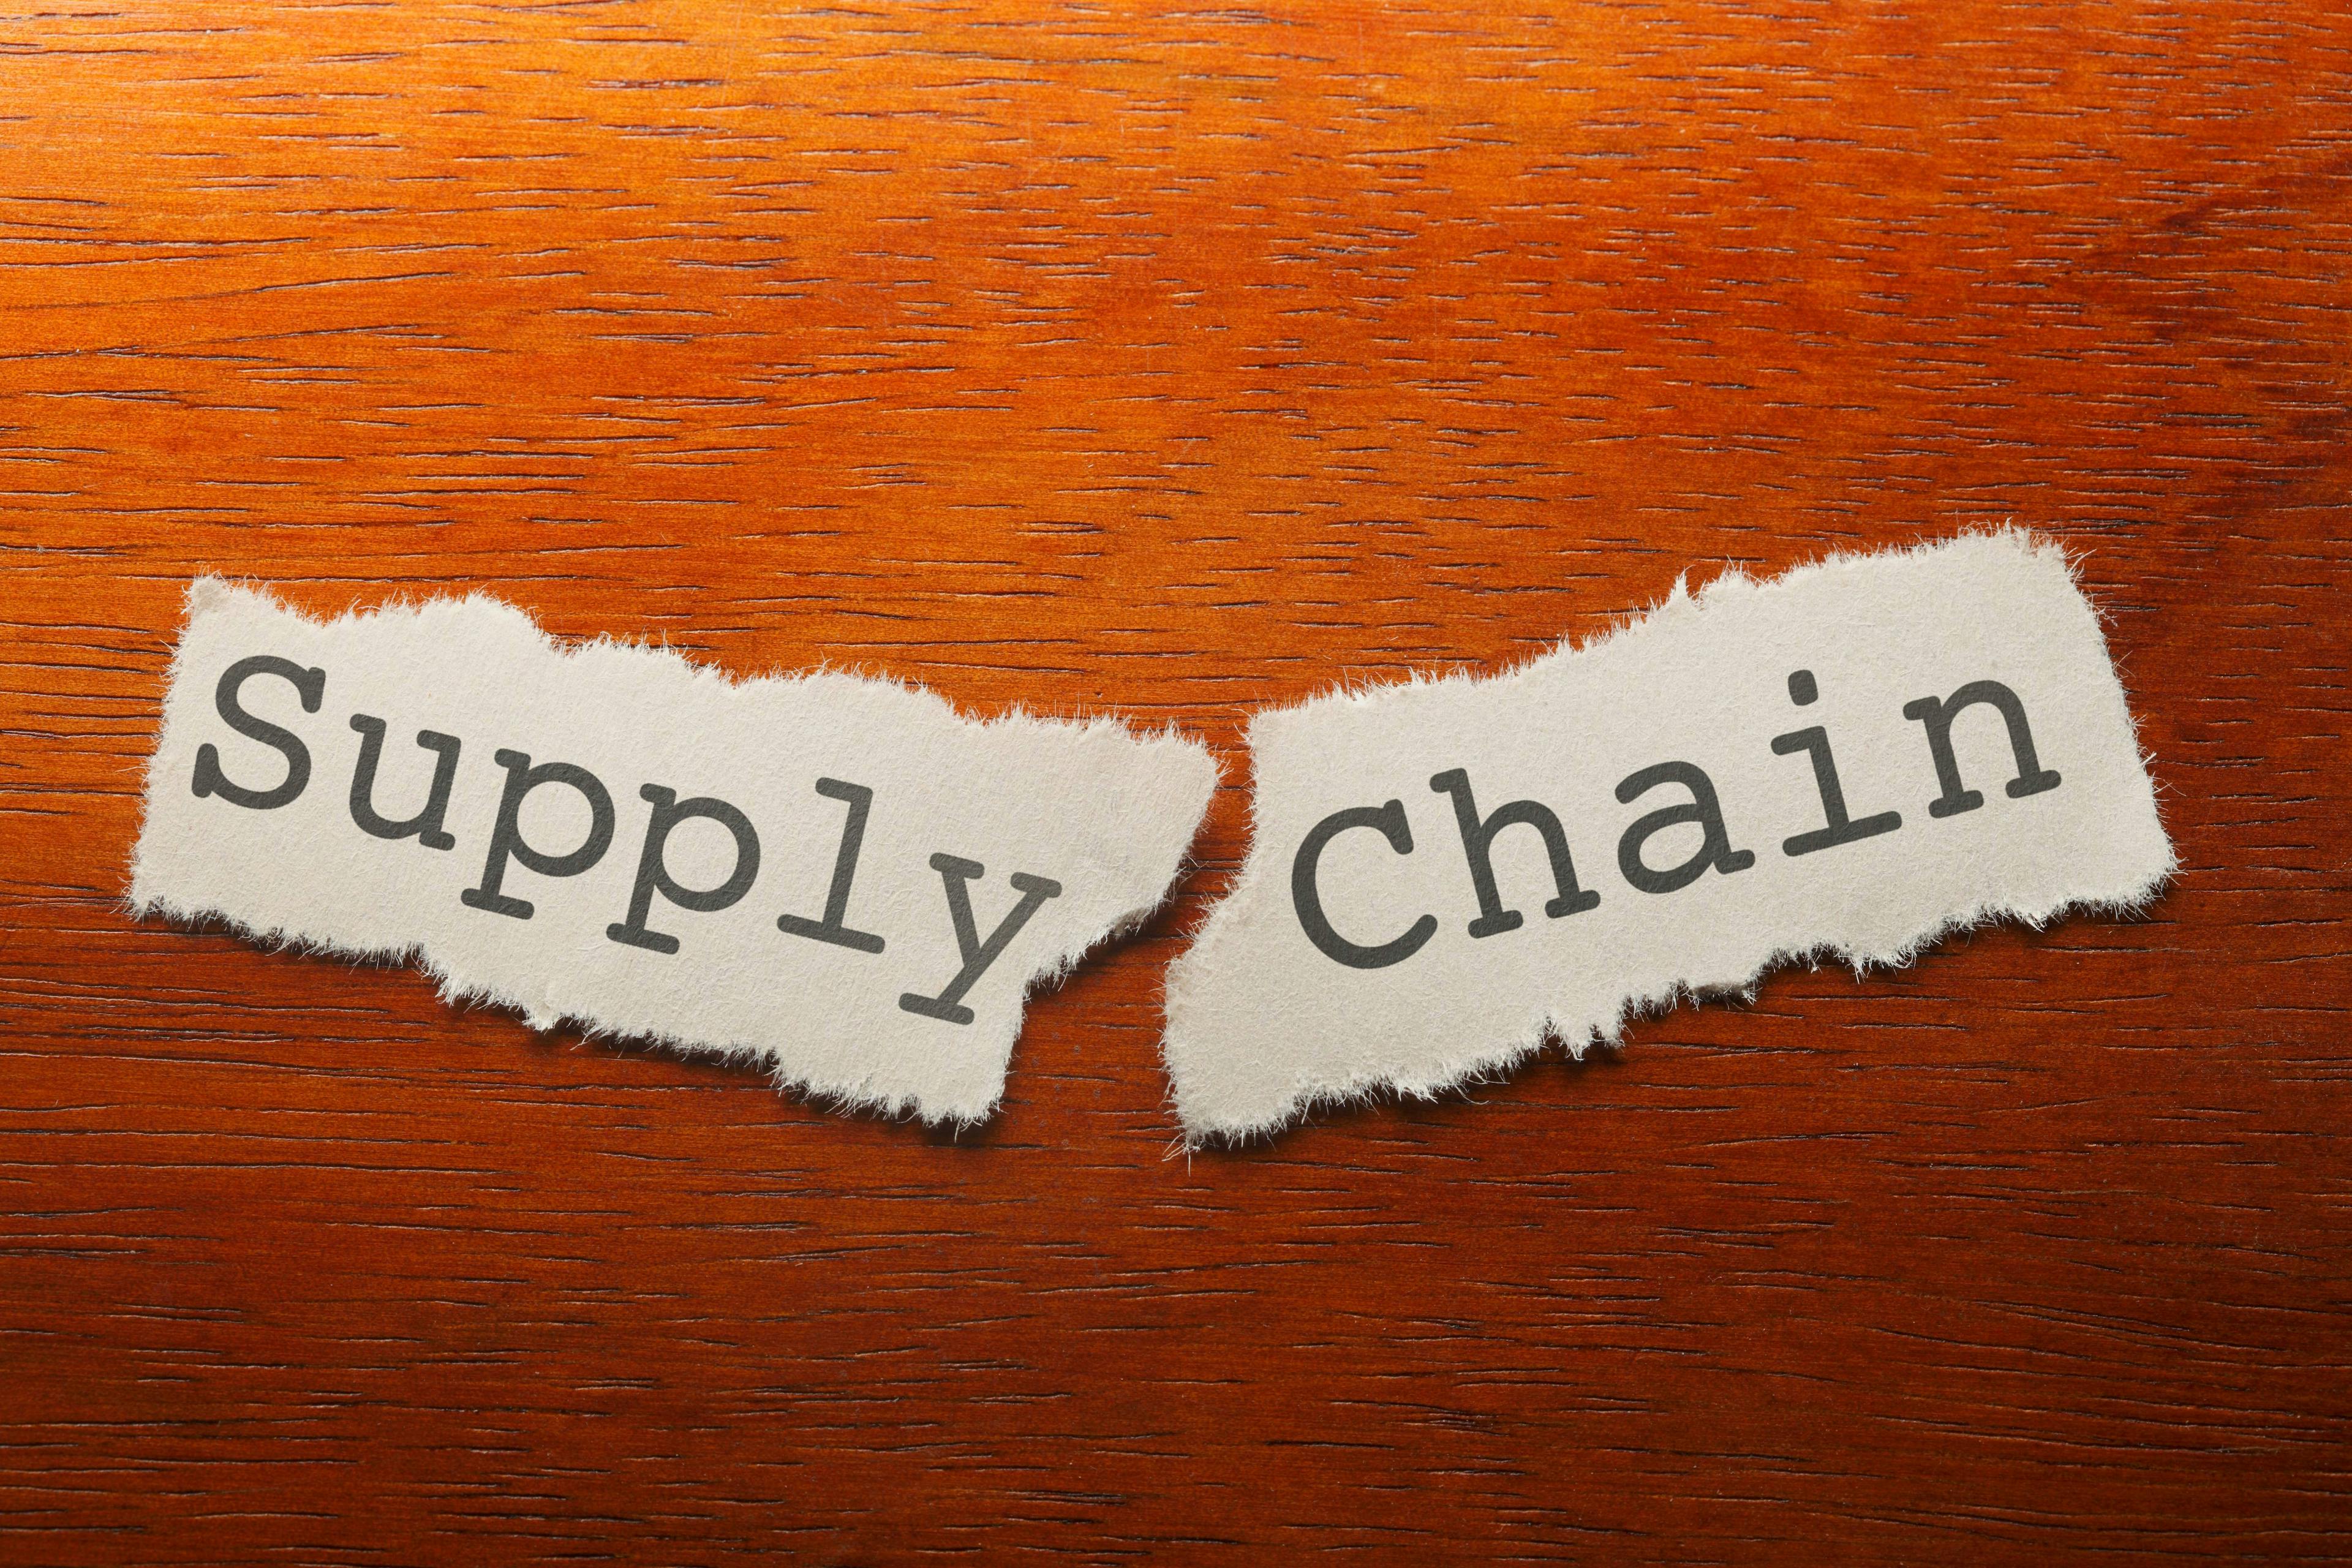 A piece of paper town in half on a desk spelling out “Supply” “Chain”